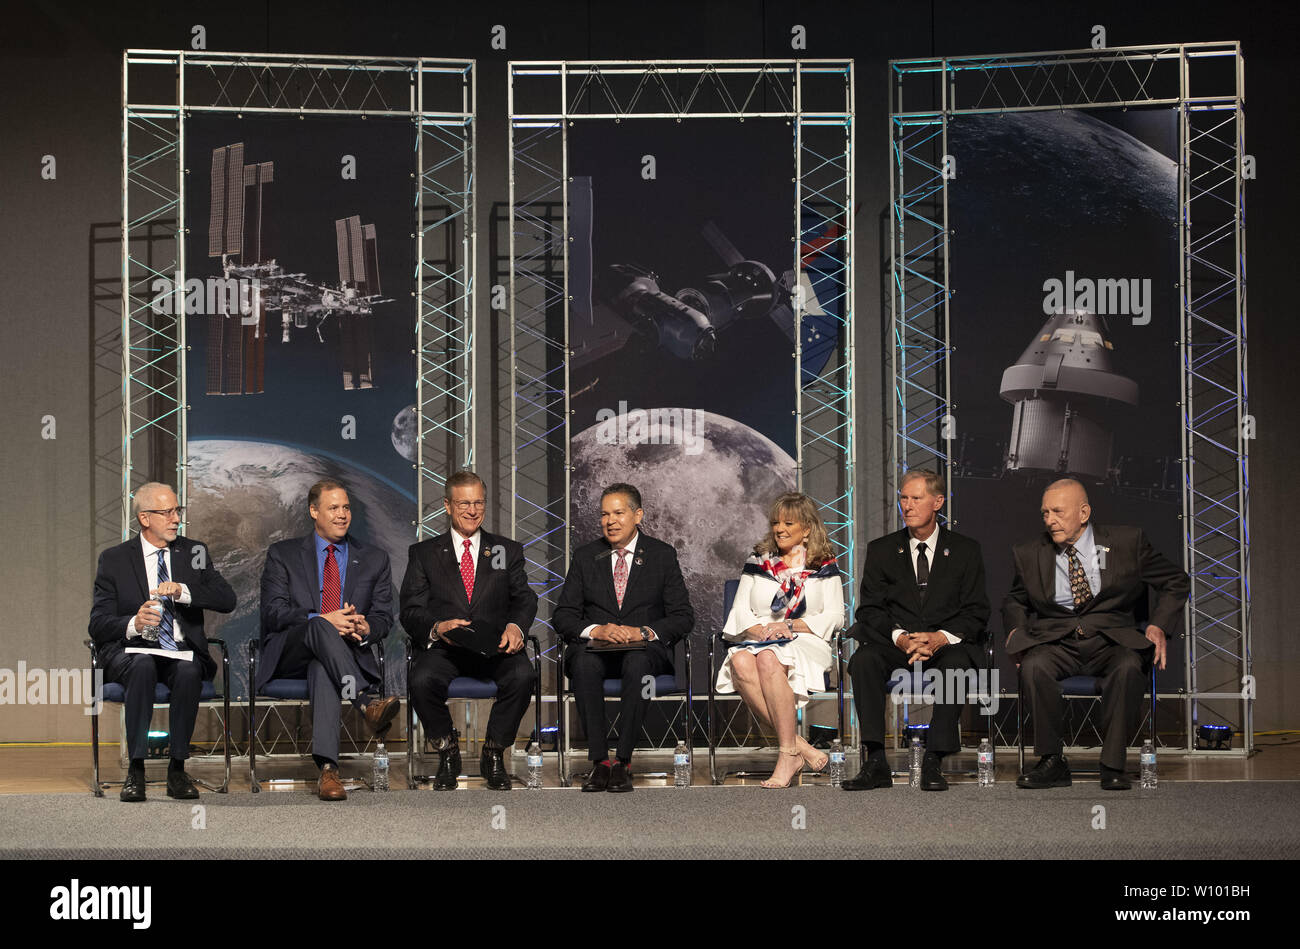 Webster, Texas, USA. 28th June, 2019. Dignitaries gather to dedicate the Mission Control Center at NASA where Apollo 11 was guided to a moon landing 50 years ago. Left to right are Johnson Space Center director Mark Geyer, NASA Administrator Jom Bridenstine, Congressman Brian Babin of Texas, William Harris of Space Center Houston, Mayor Donna Rogers, Wayne Donaldson and Flight Director Gene Krantz. Credit: Bob Daemmrich/ZUMA Wire/Alamy Live News Stock Photo